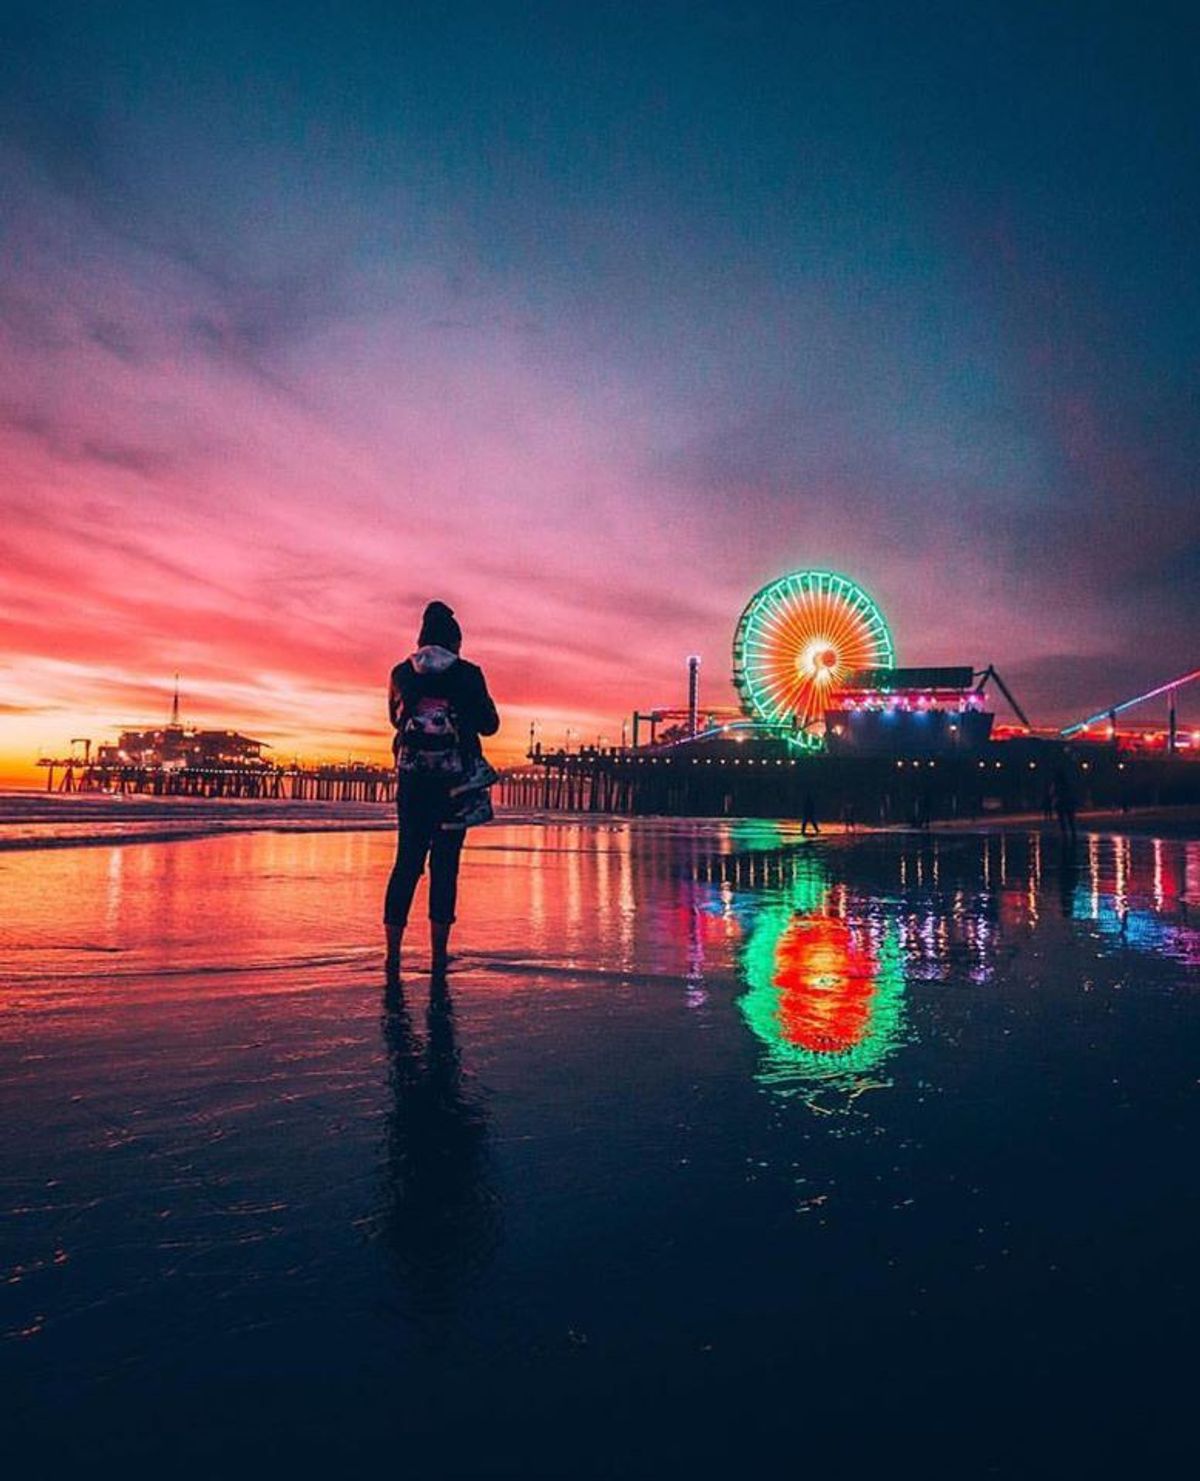 10 Instagram Pages For The Artistic Soul